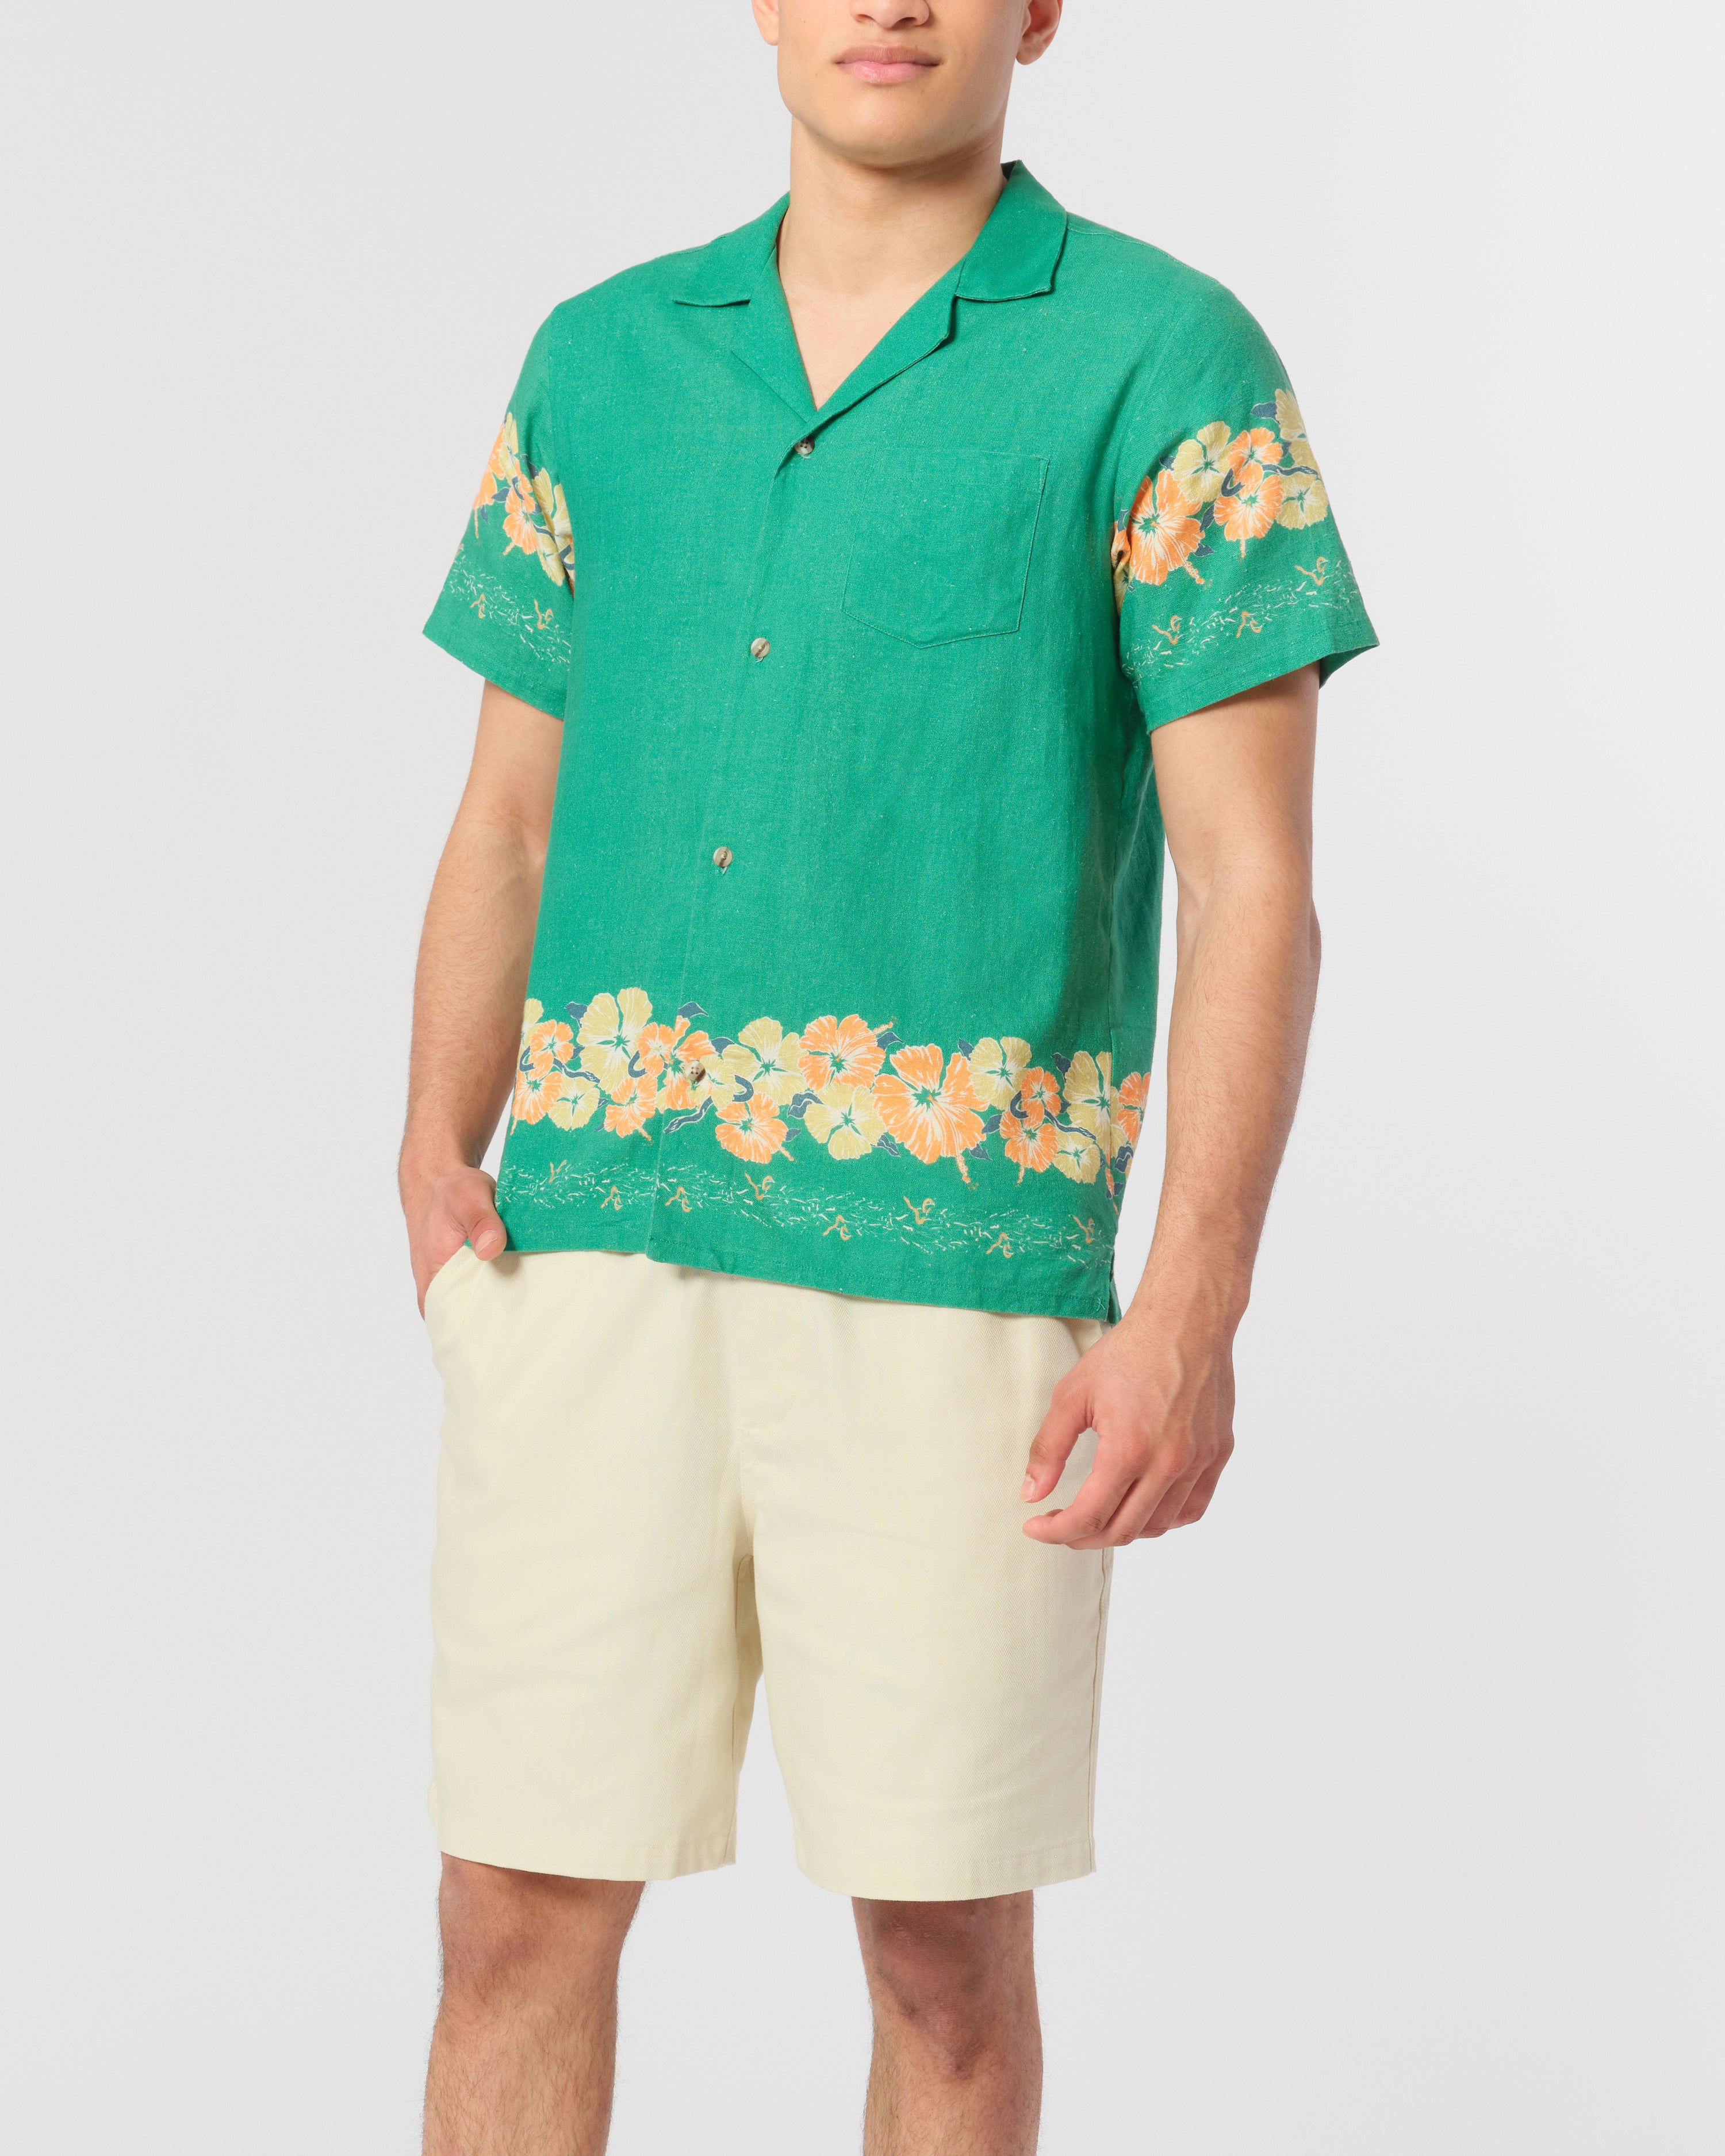 Green camp shirt with floral motif pattern on the sleeves and bottom hem Shot on Model